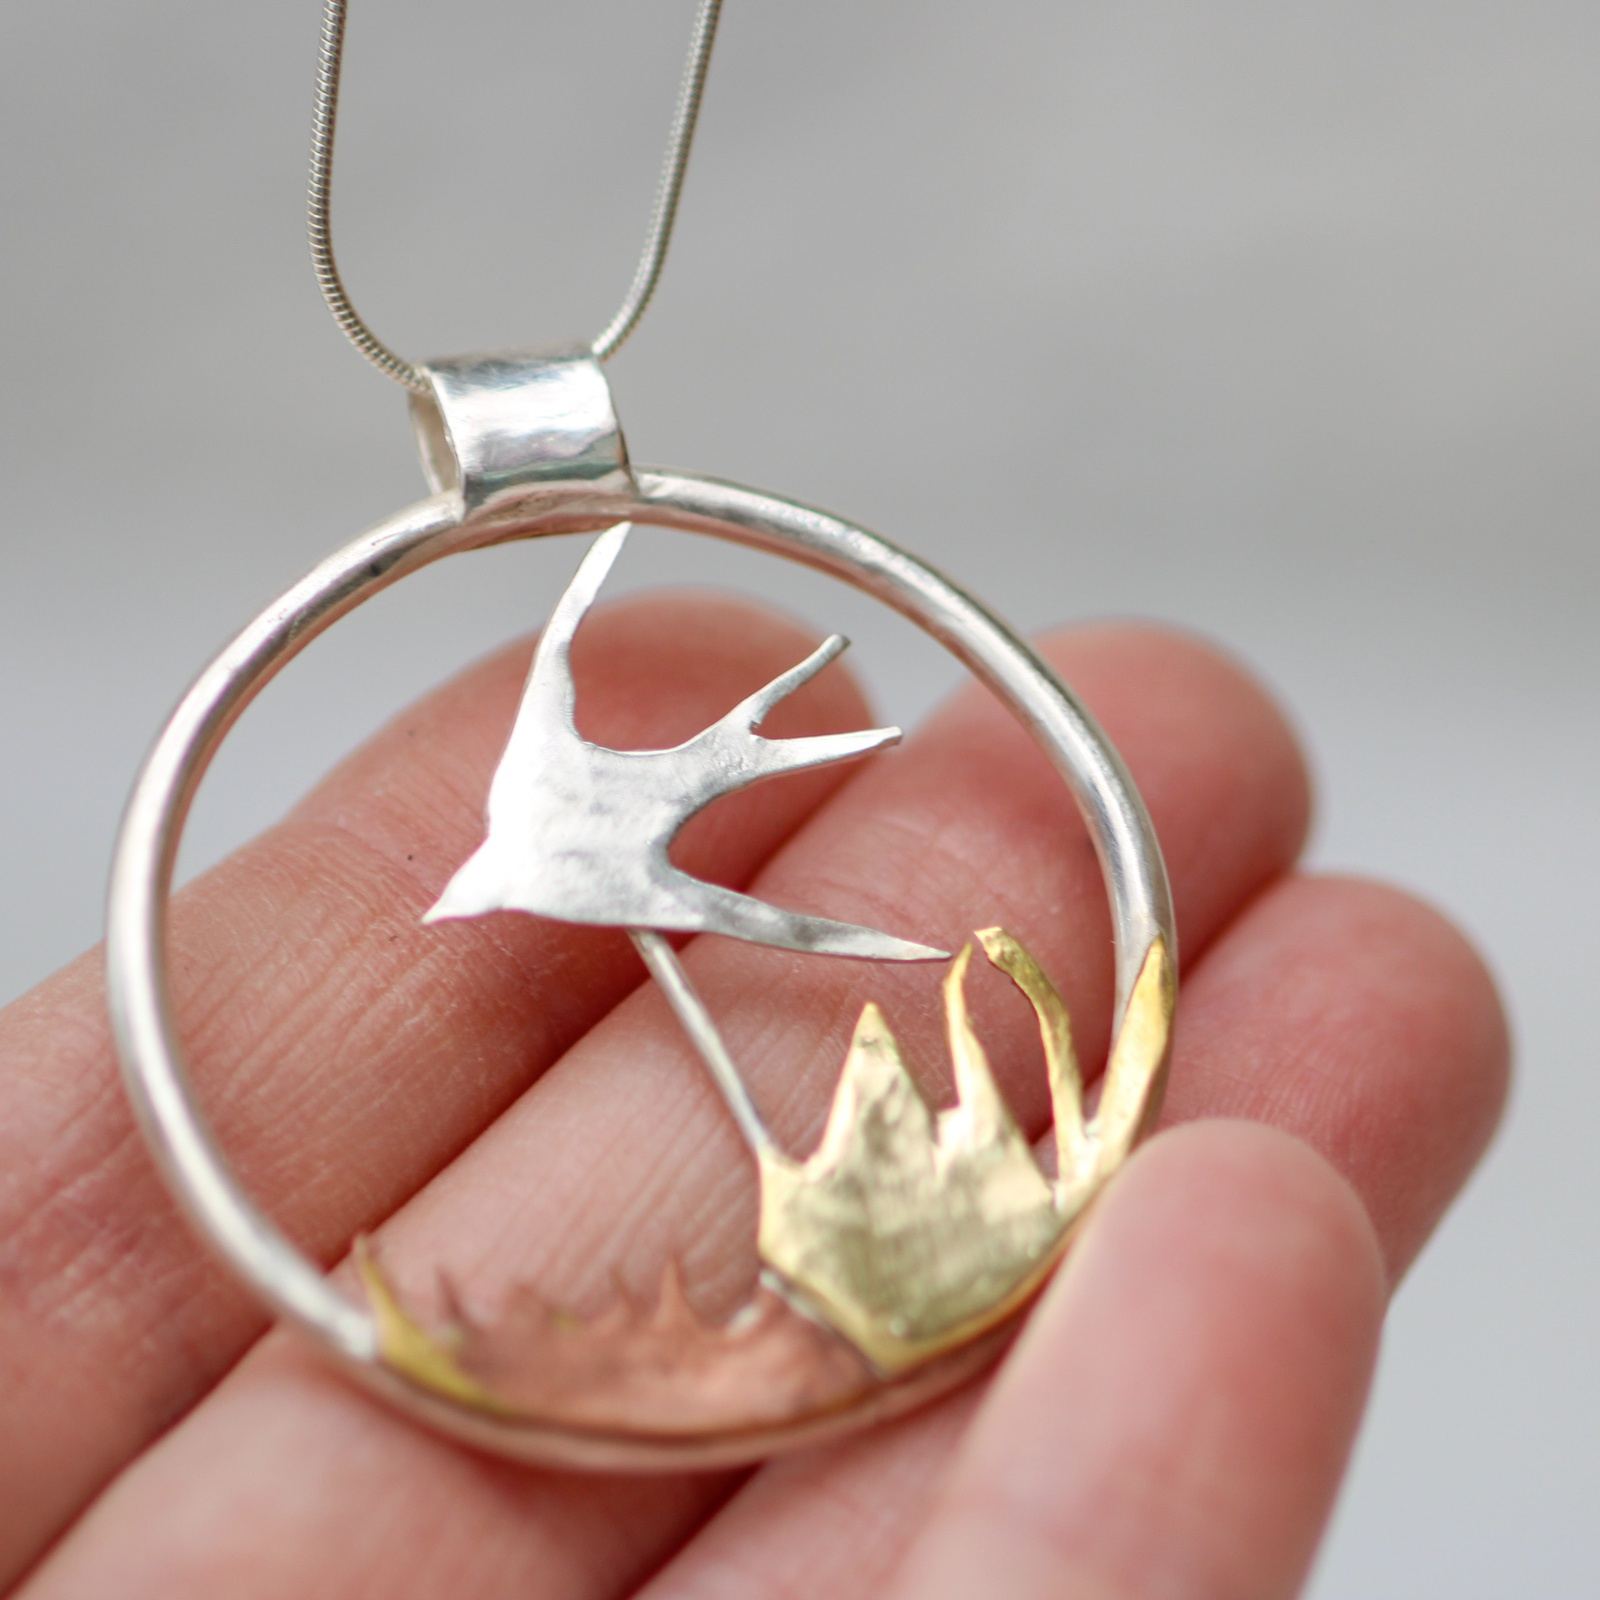 Kinetic swallow necklace - moving jewellery louella-jewellery